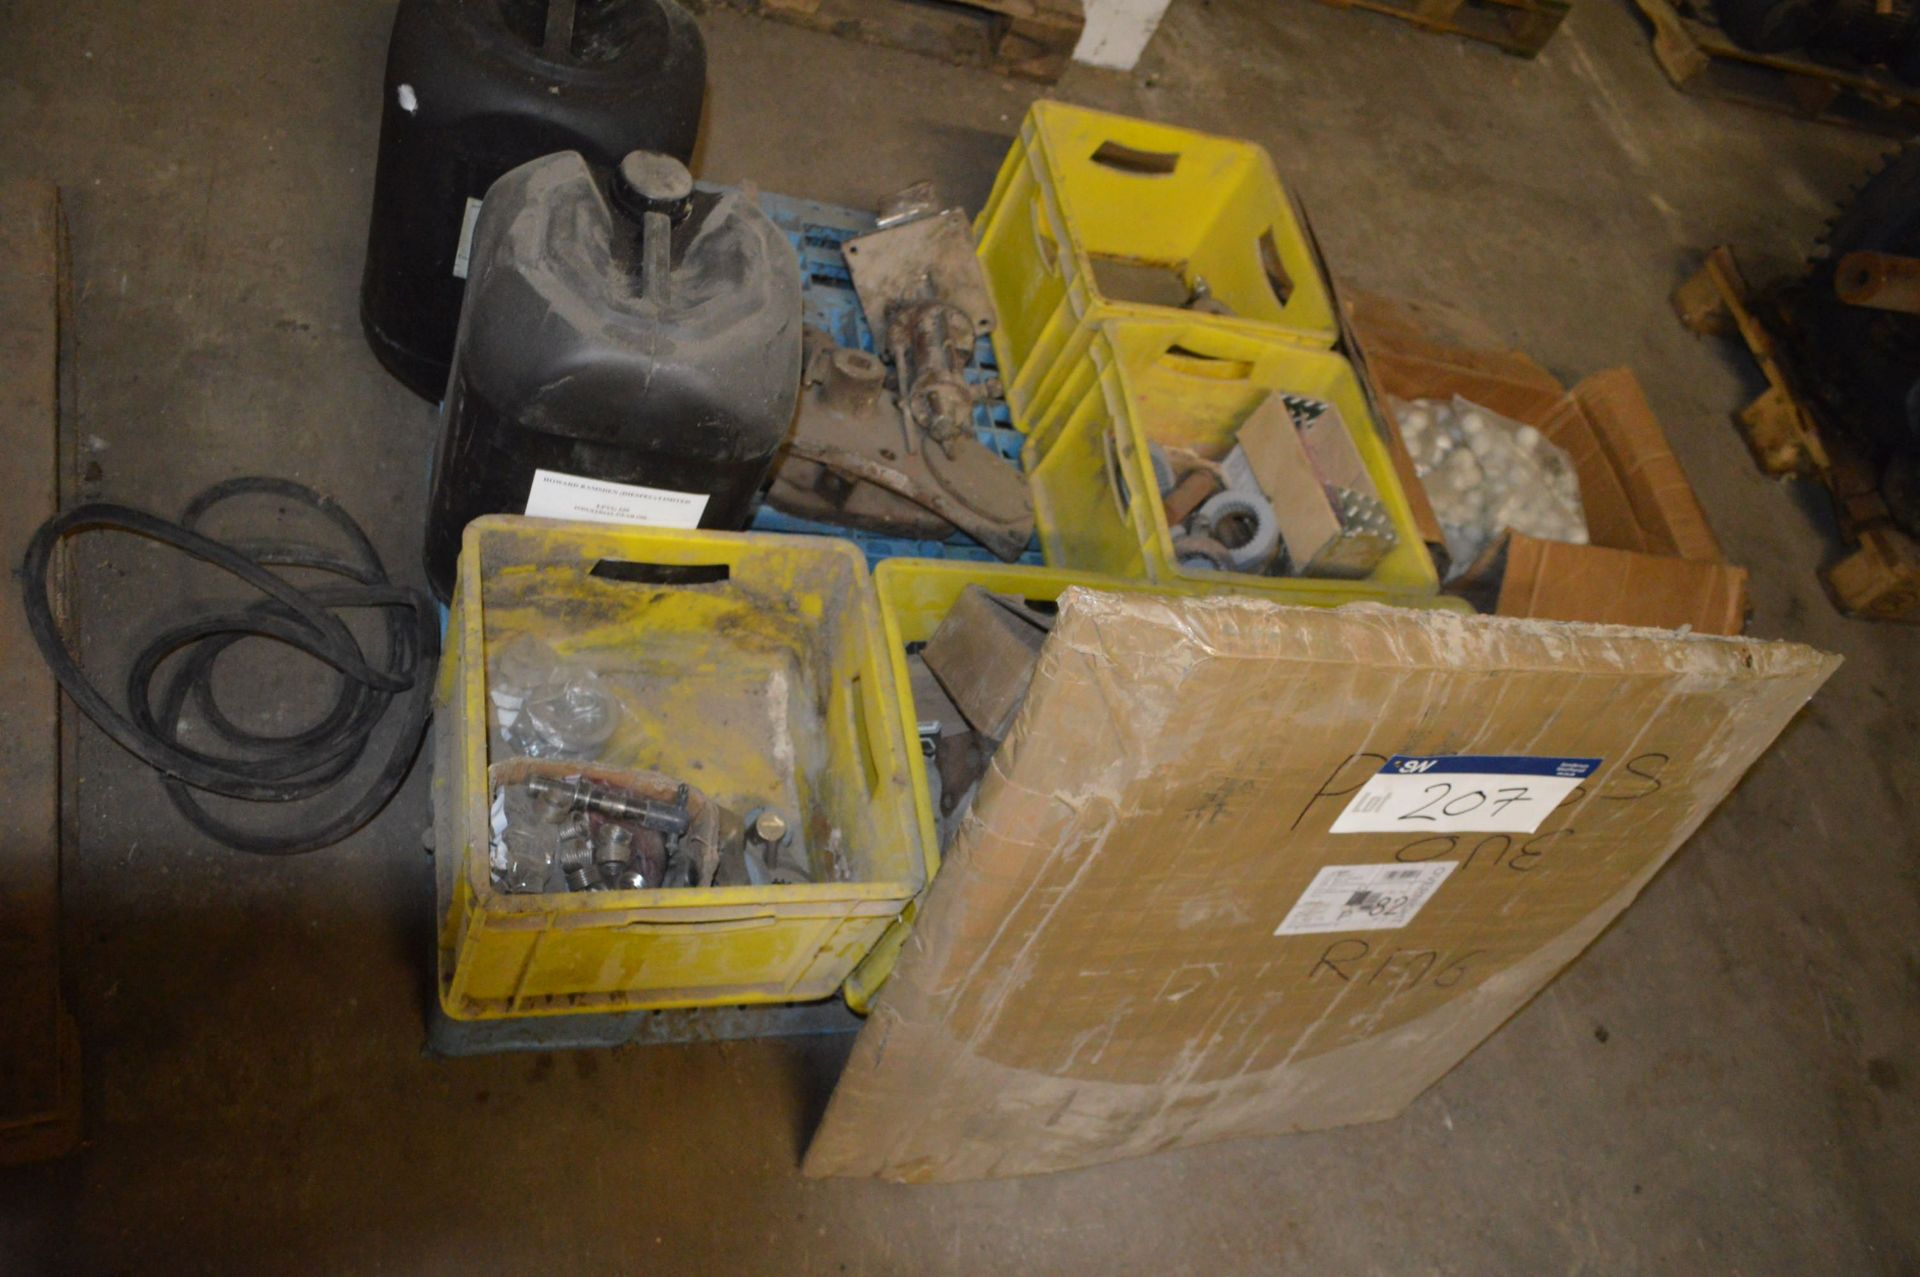 Assorted Press Spares, as set out on pallet